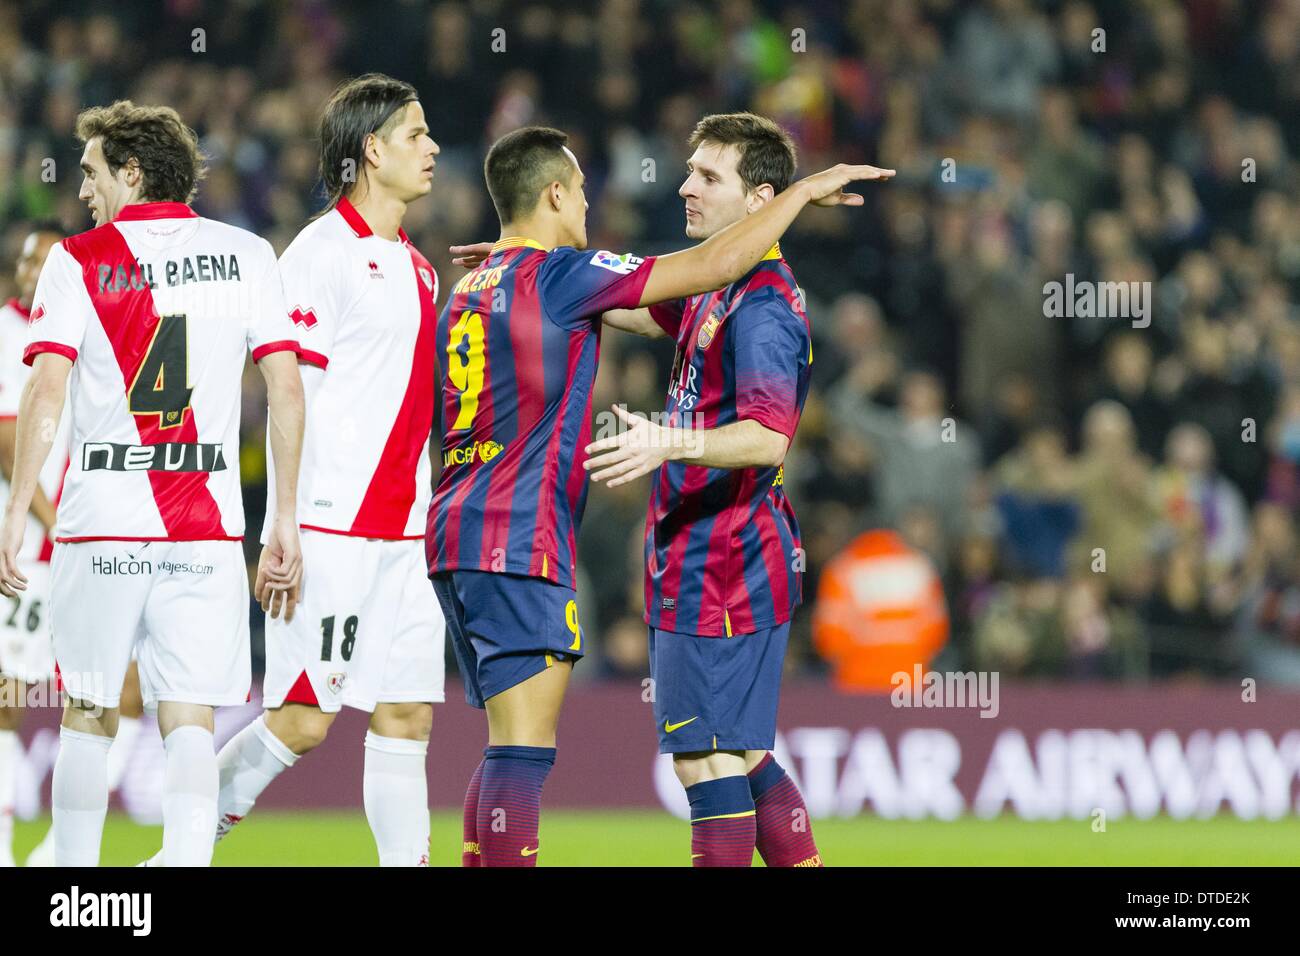 Barcellona, Spain. 15th Feb, 2014. BARCELONA - 15 of february - ESPANA: Alexis Sanchez and Leo Messi celebrating the goal during the match of the rounnd 24 of Liga BBVA between FC Barcelona and Rayo Vallecano, played at Camp Nou stadium, saturday, 15 of february of 2014. Credit:  Mikel Trigueros/NurPhoto/ZUMAPRESS.com/Alamy Live News Stock Photo